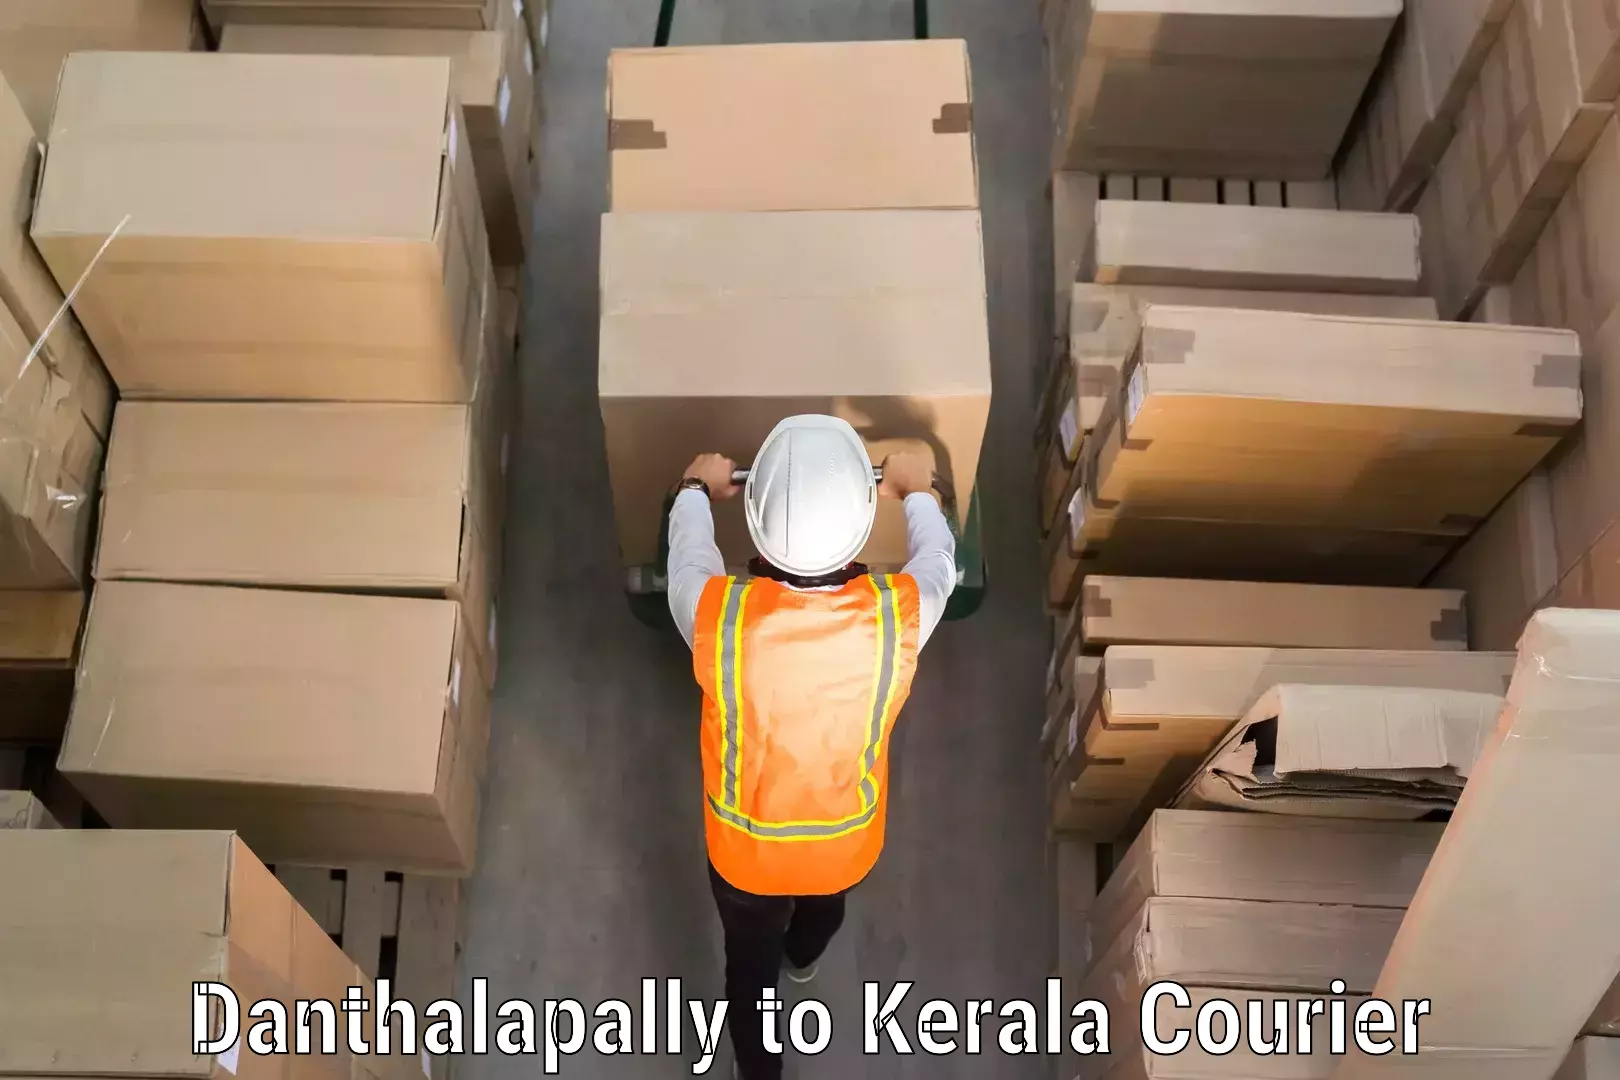 Hassle-free luggage shipping in Danthalapally to Kochi